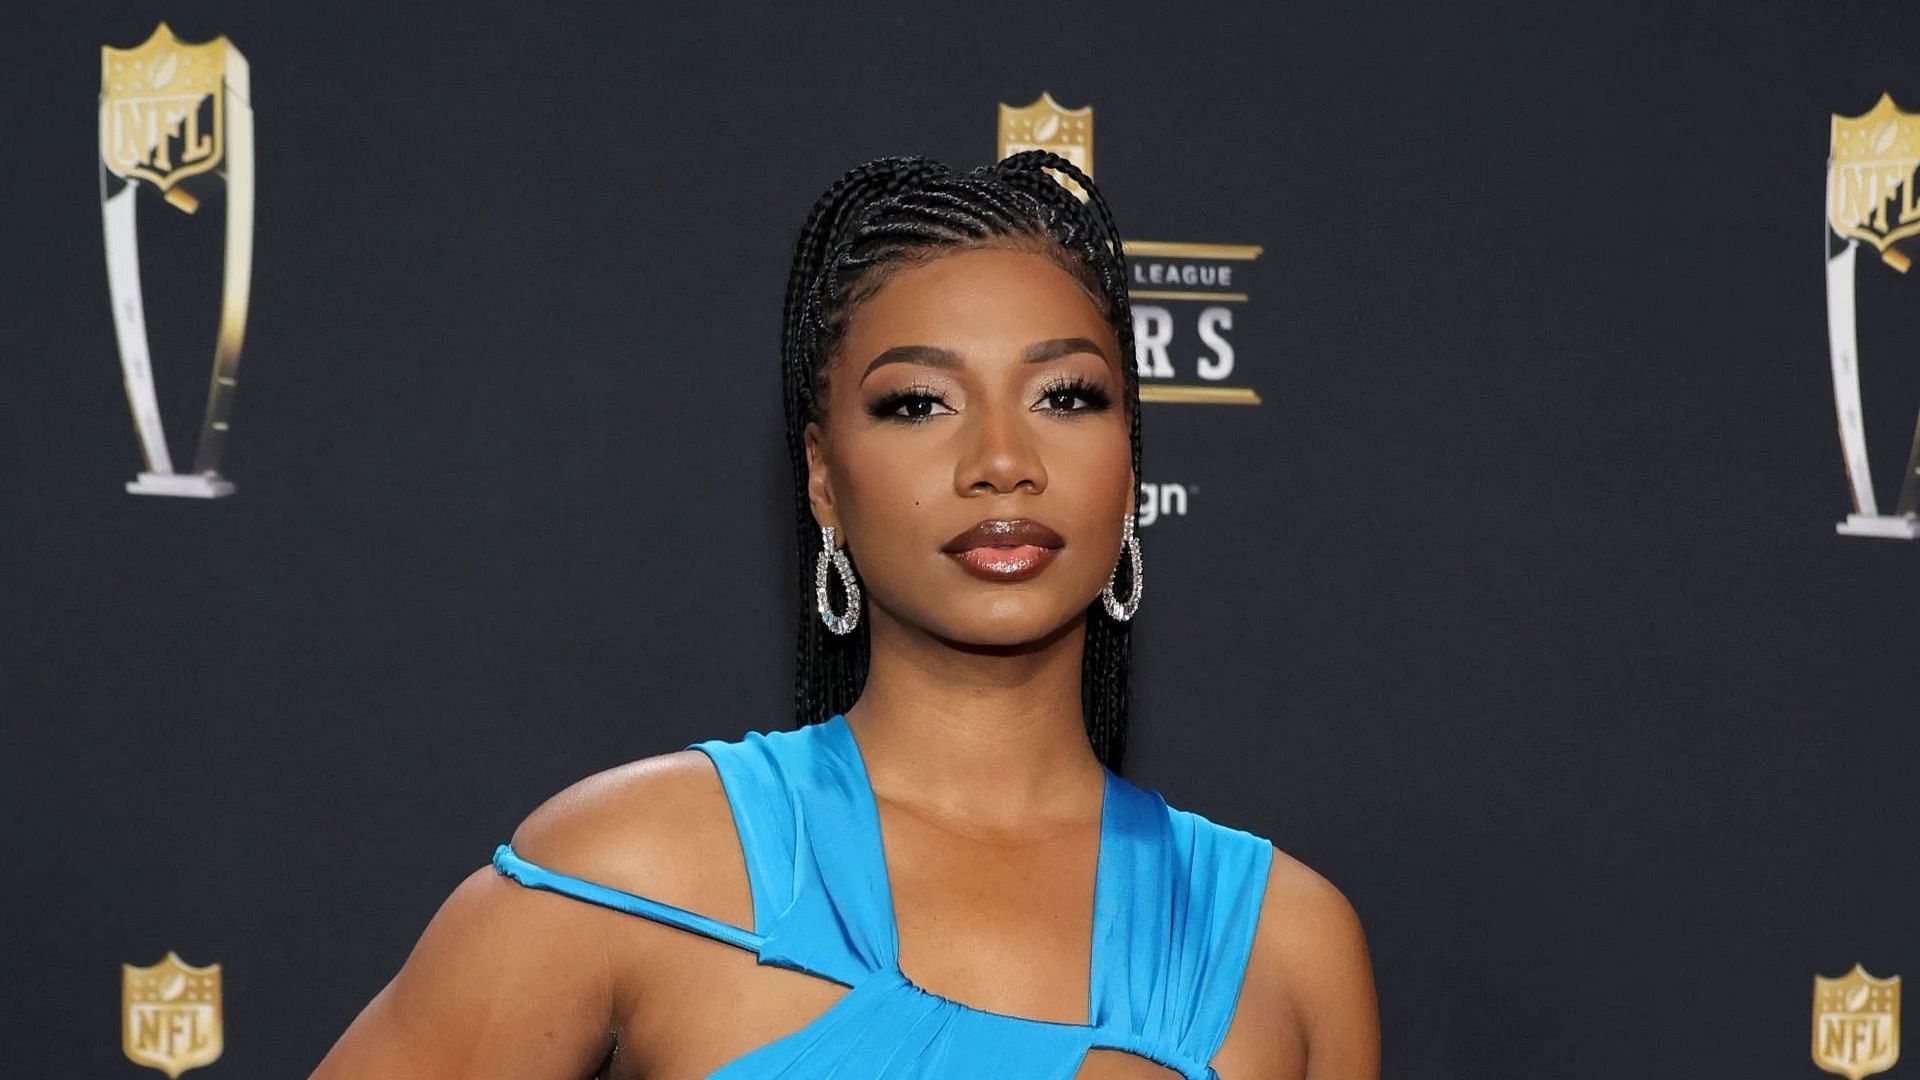 Taylor Rooks makes an appearance at NFL Honors